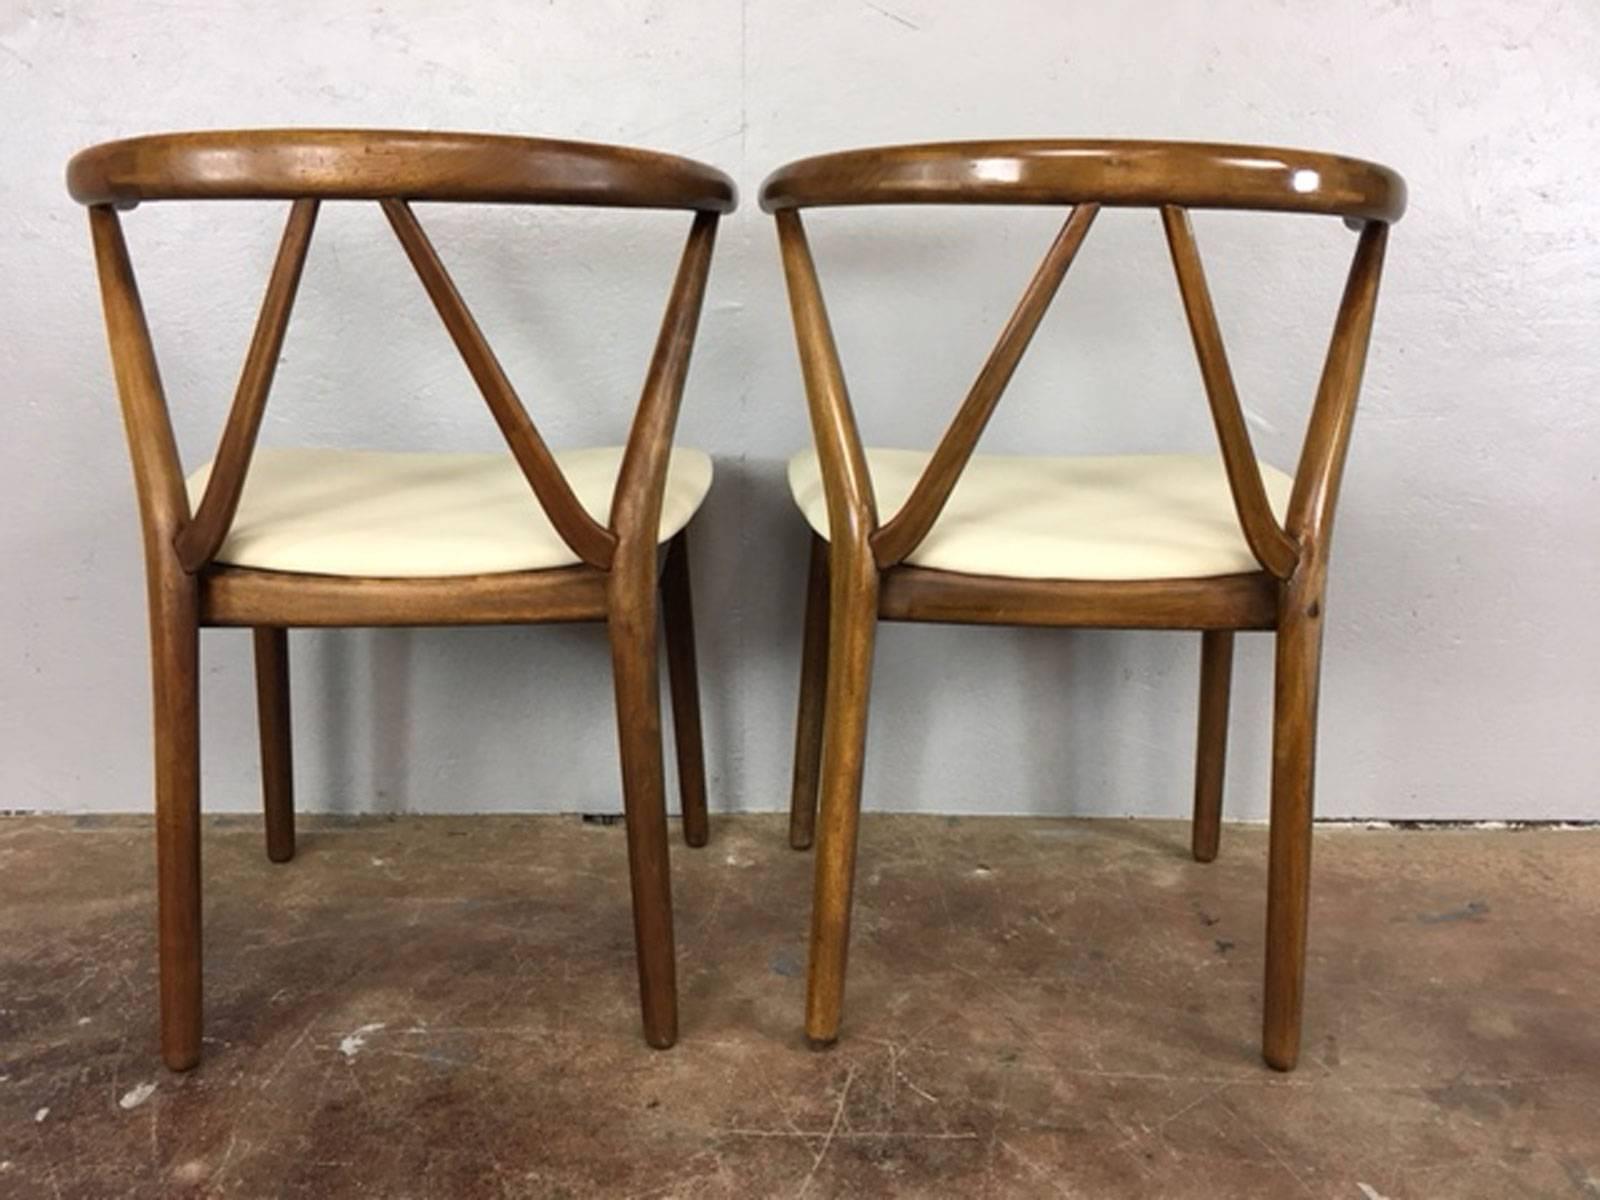 Designed by Henning Kjærnulf for Bruno Hansen, Denmark, circa 1960s. Solid teak frames with curved backrests and superb joinery. Newly upholstered in a cream or neutral leather. One photo depicts a small, repaired hairline fracture. Stamped Bruno